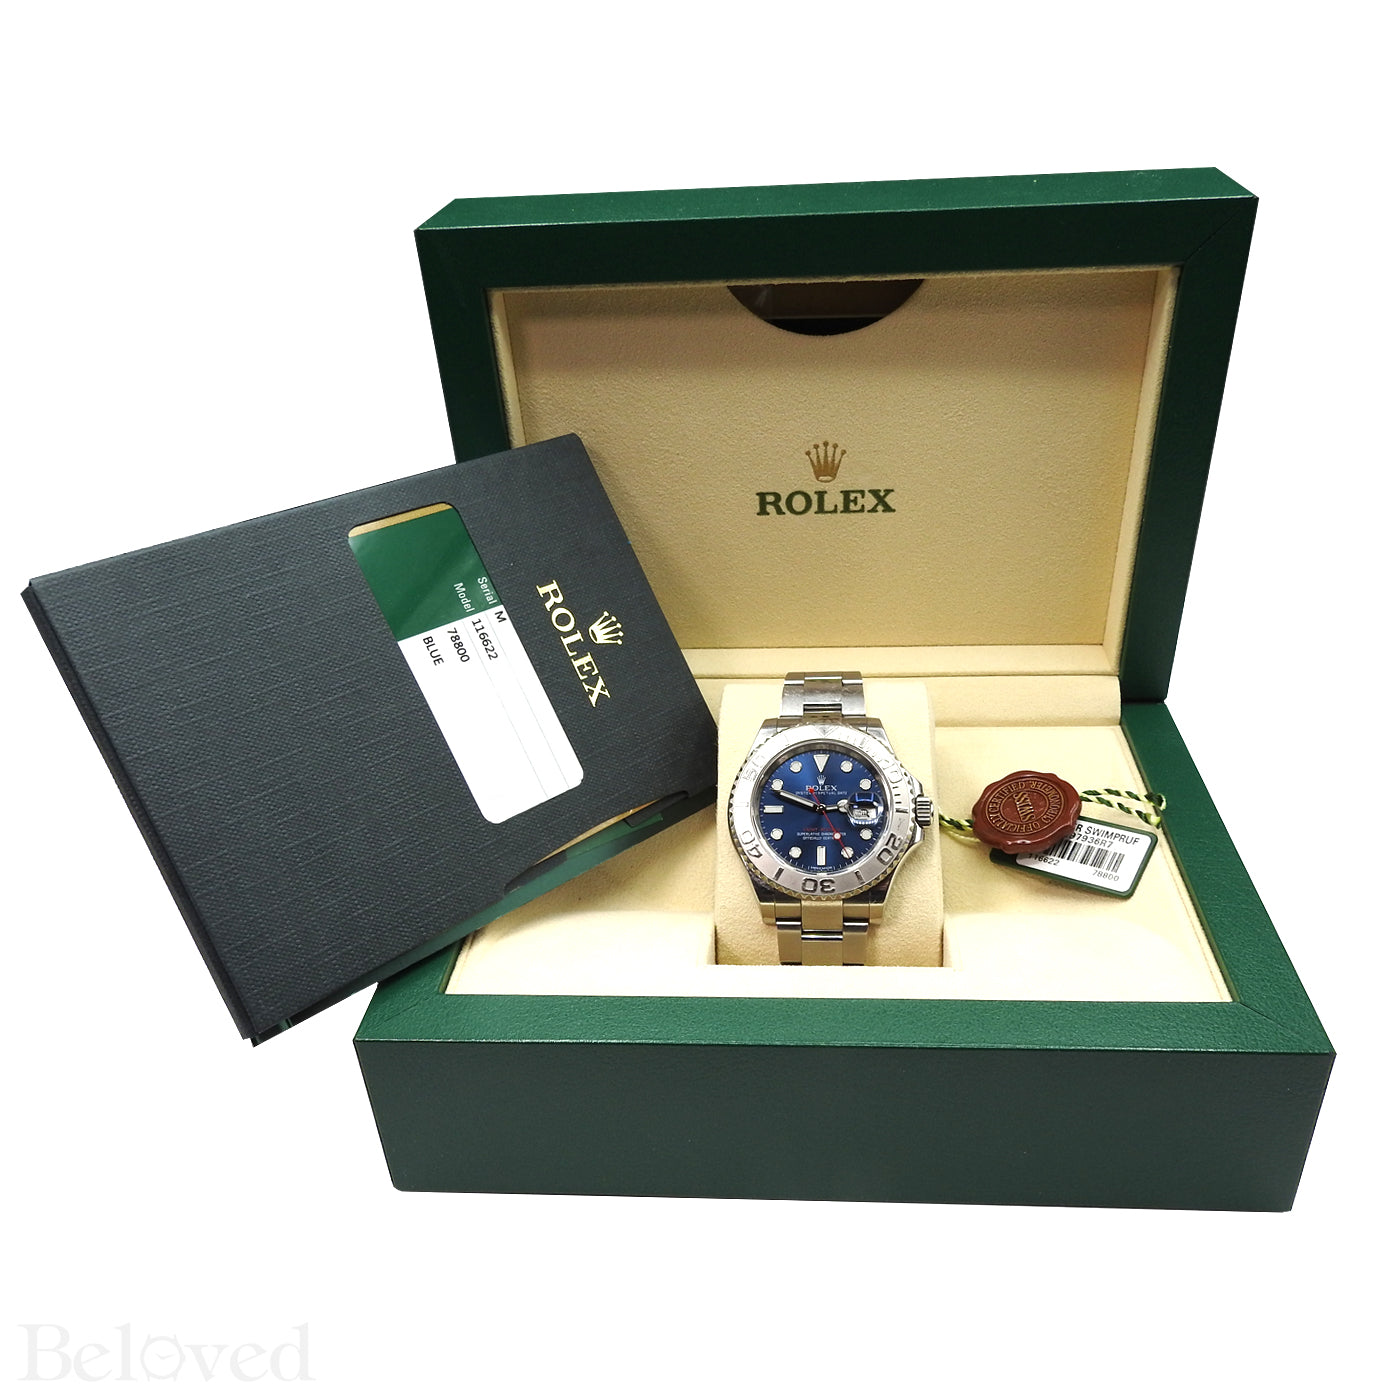 Rolex Yacht-Master 116622 Blue Dial Complete with Warranty Card & Rolex Box Image 8